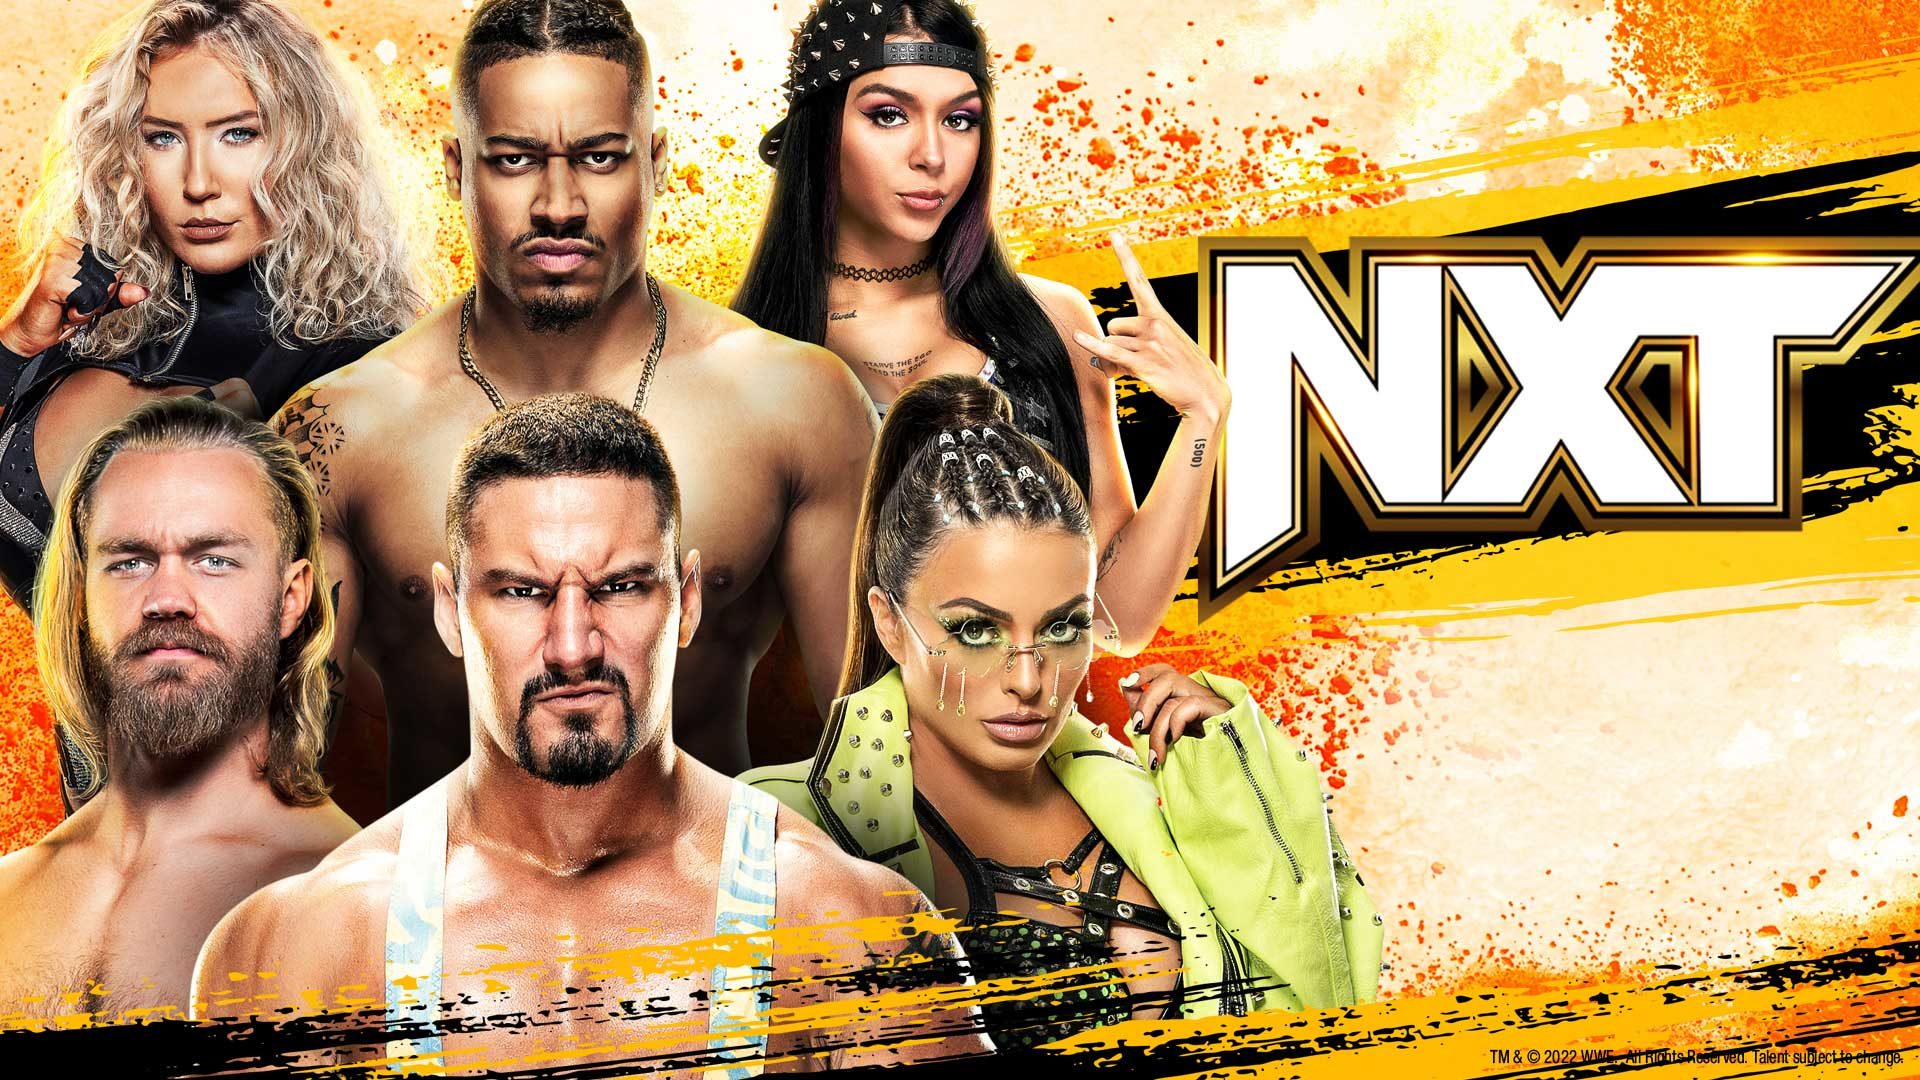 WWE NXT Extreme Channel